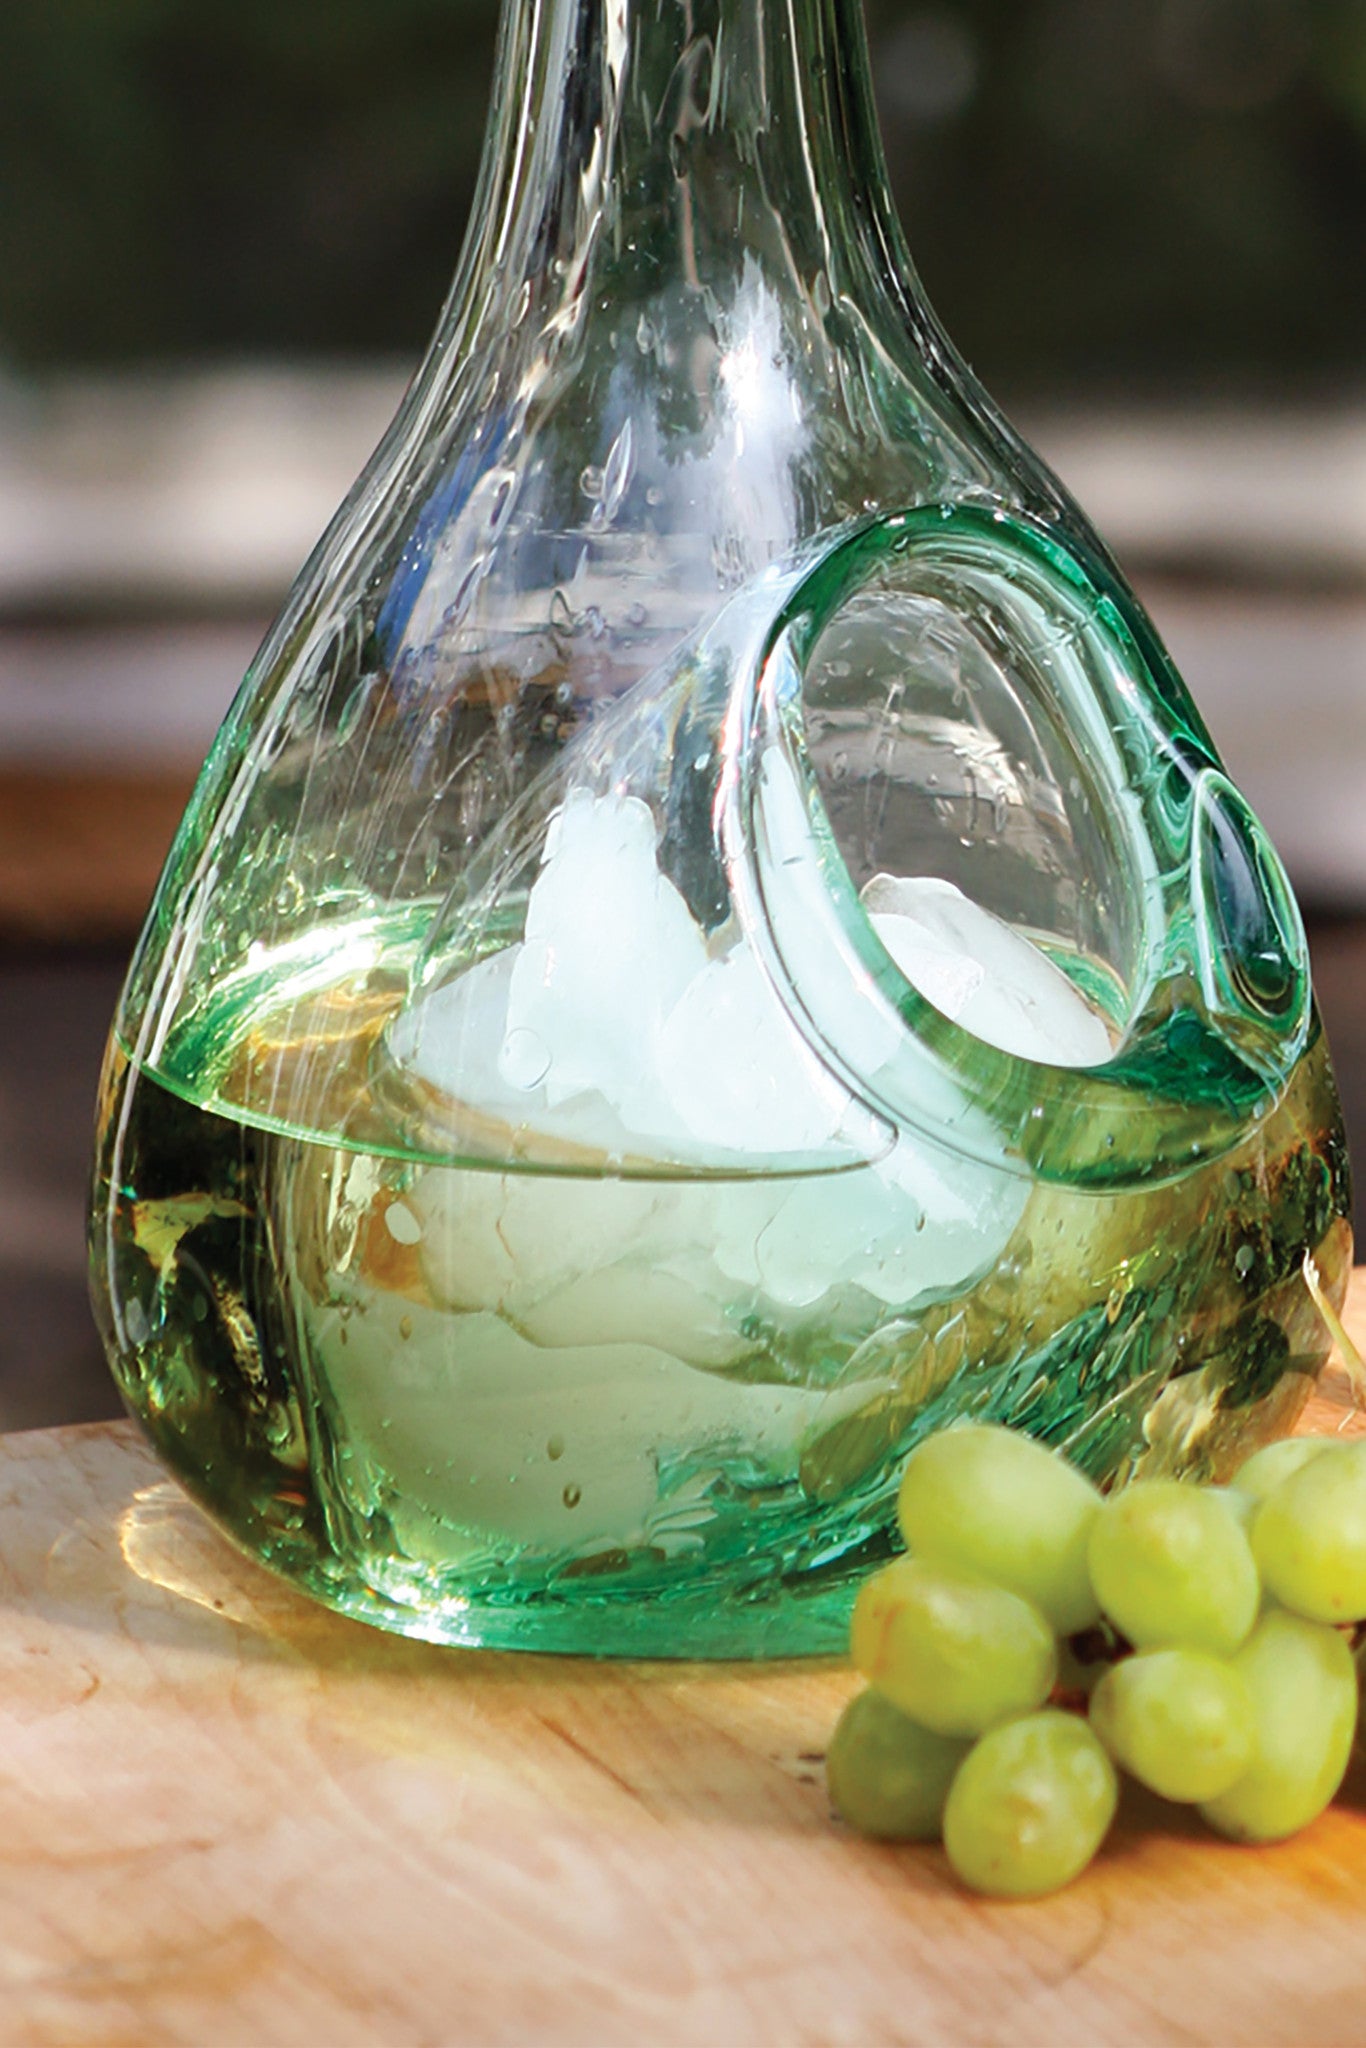 https://cdn.shopify.com/s/files/1/0010/0852/products/Decor_Modern_Glass_Wine_Decanter_With_Ice_Pocket_1366x2048.jpg?v=1571436293